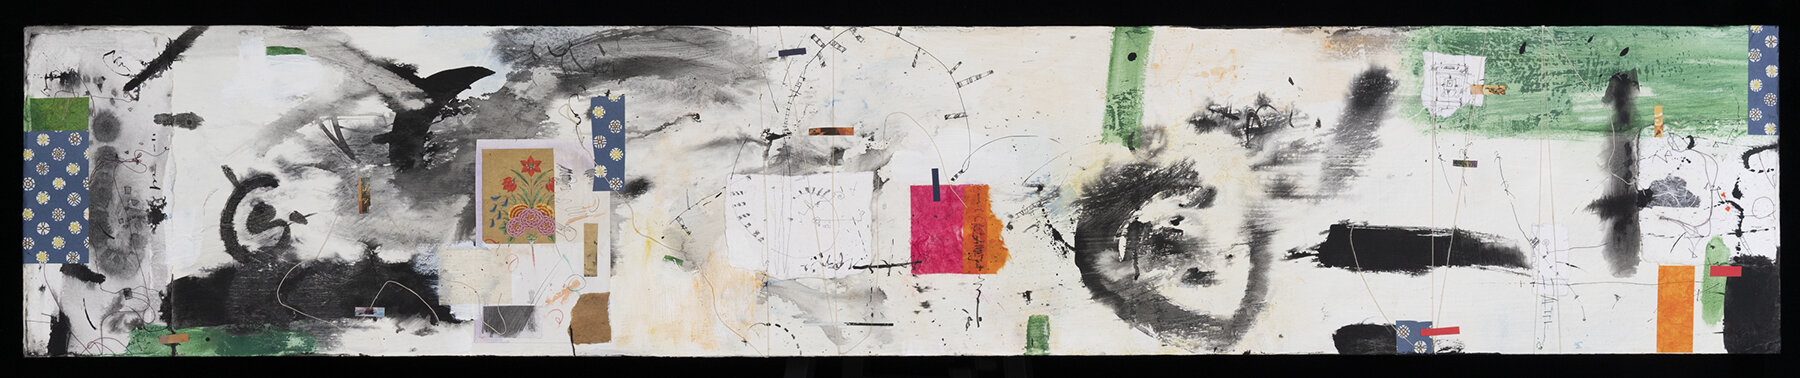  Wessex; Acrylic, Rice paper, and Fiber on Wood panel 15x79” 2021 